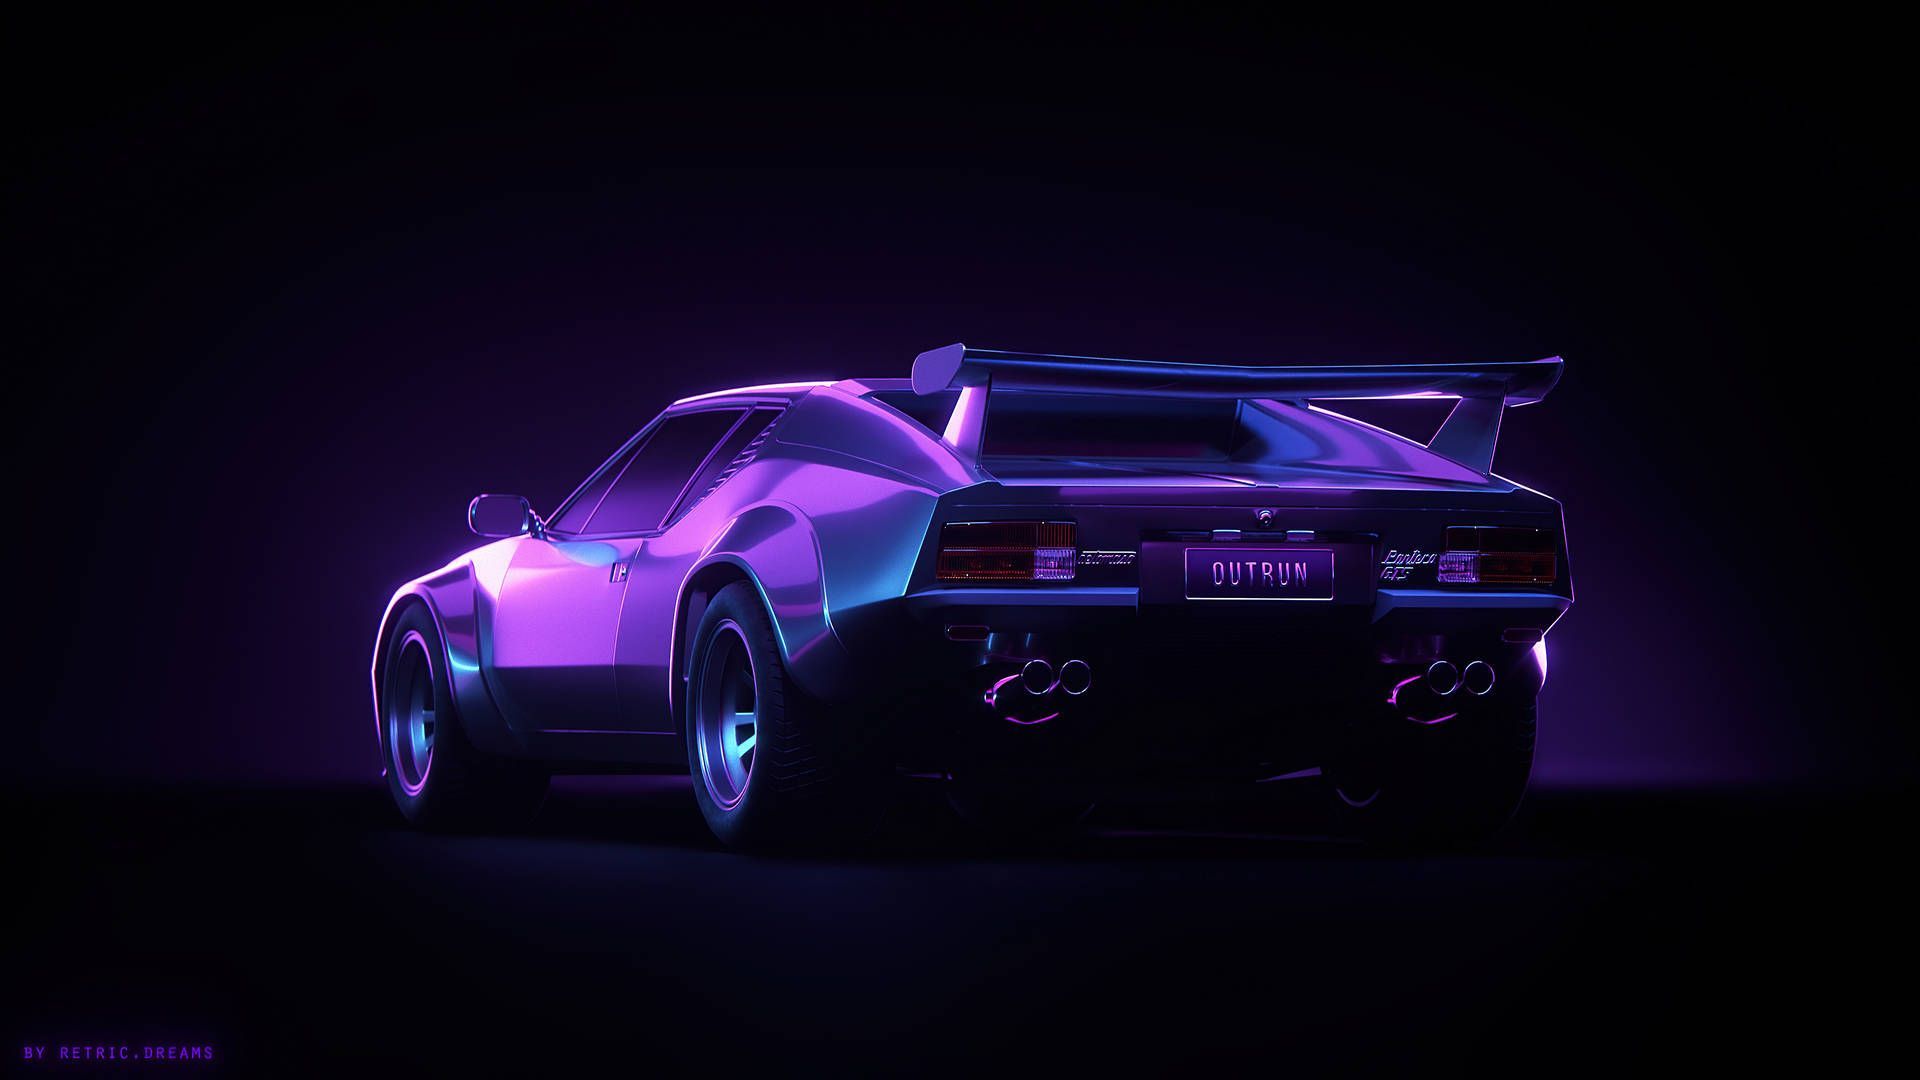 A purple car with its lights on in the dark - Cars